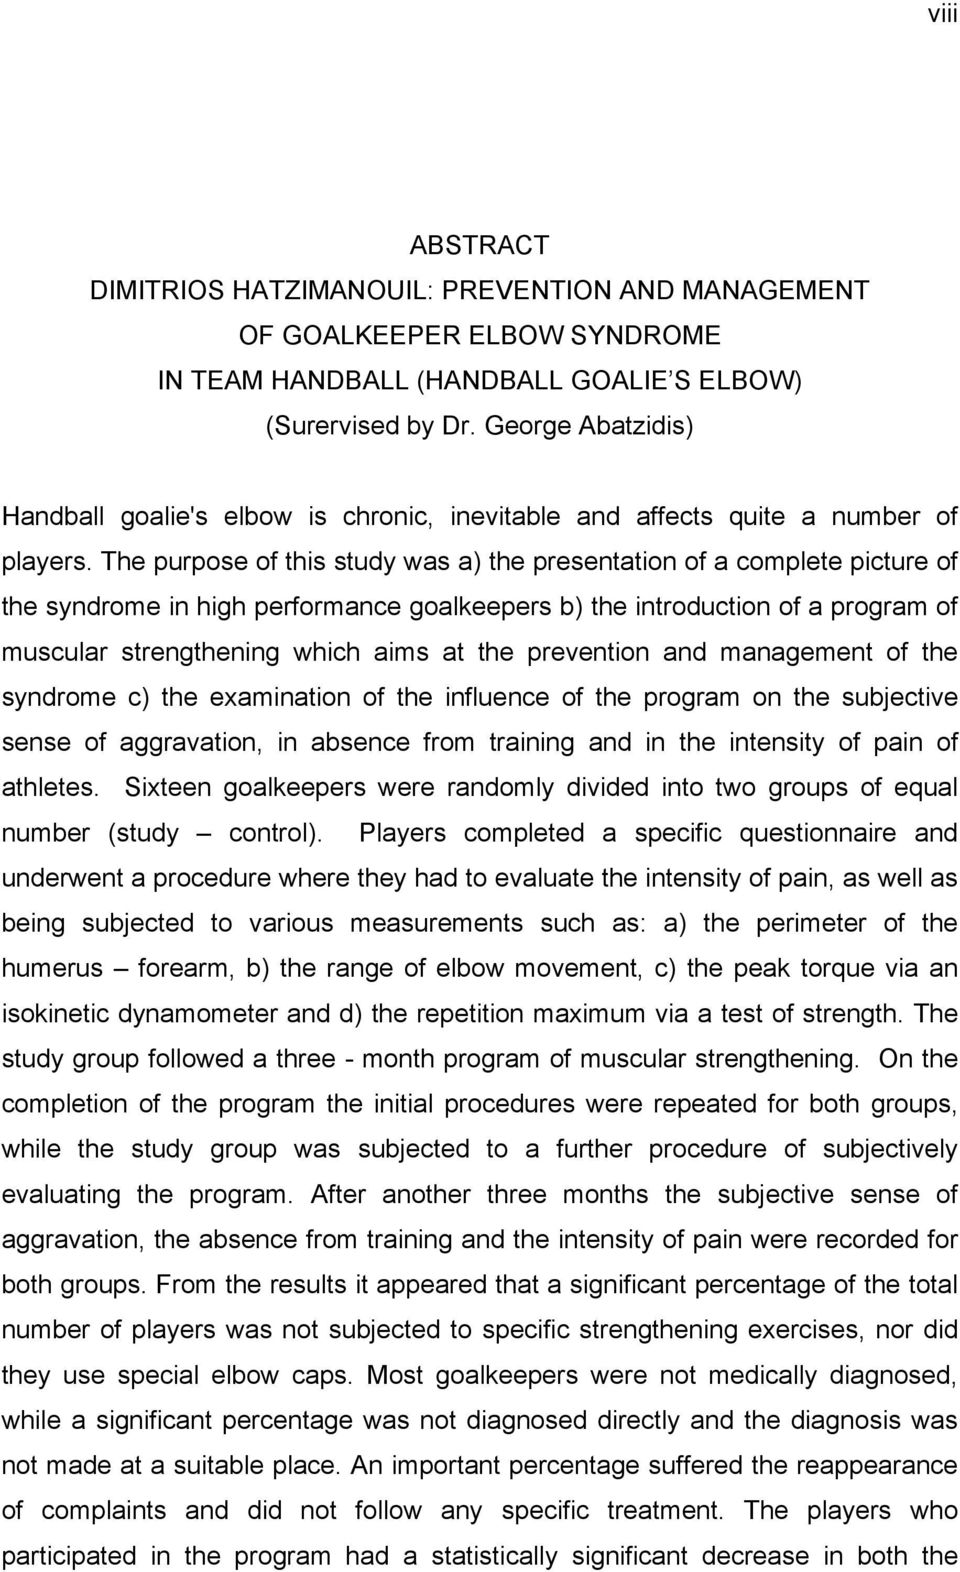 The purpose of this study was a) the presentation of a complete picture of the syndrome in high performance goalkeepers b) the introduction of a program of muscular strengthening which aims at the